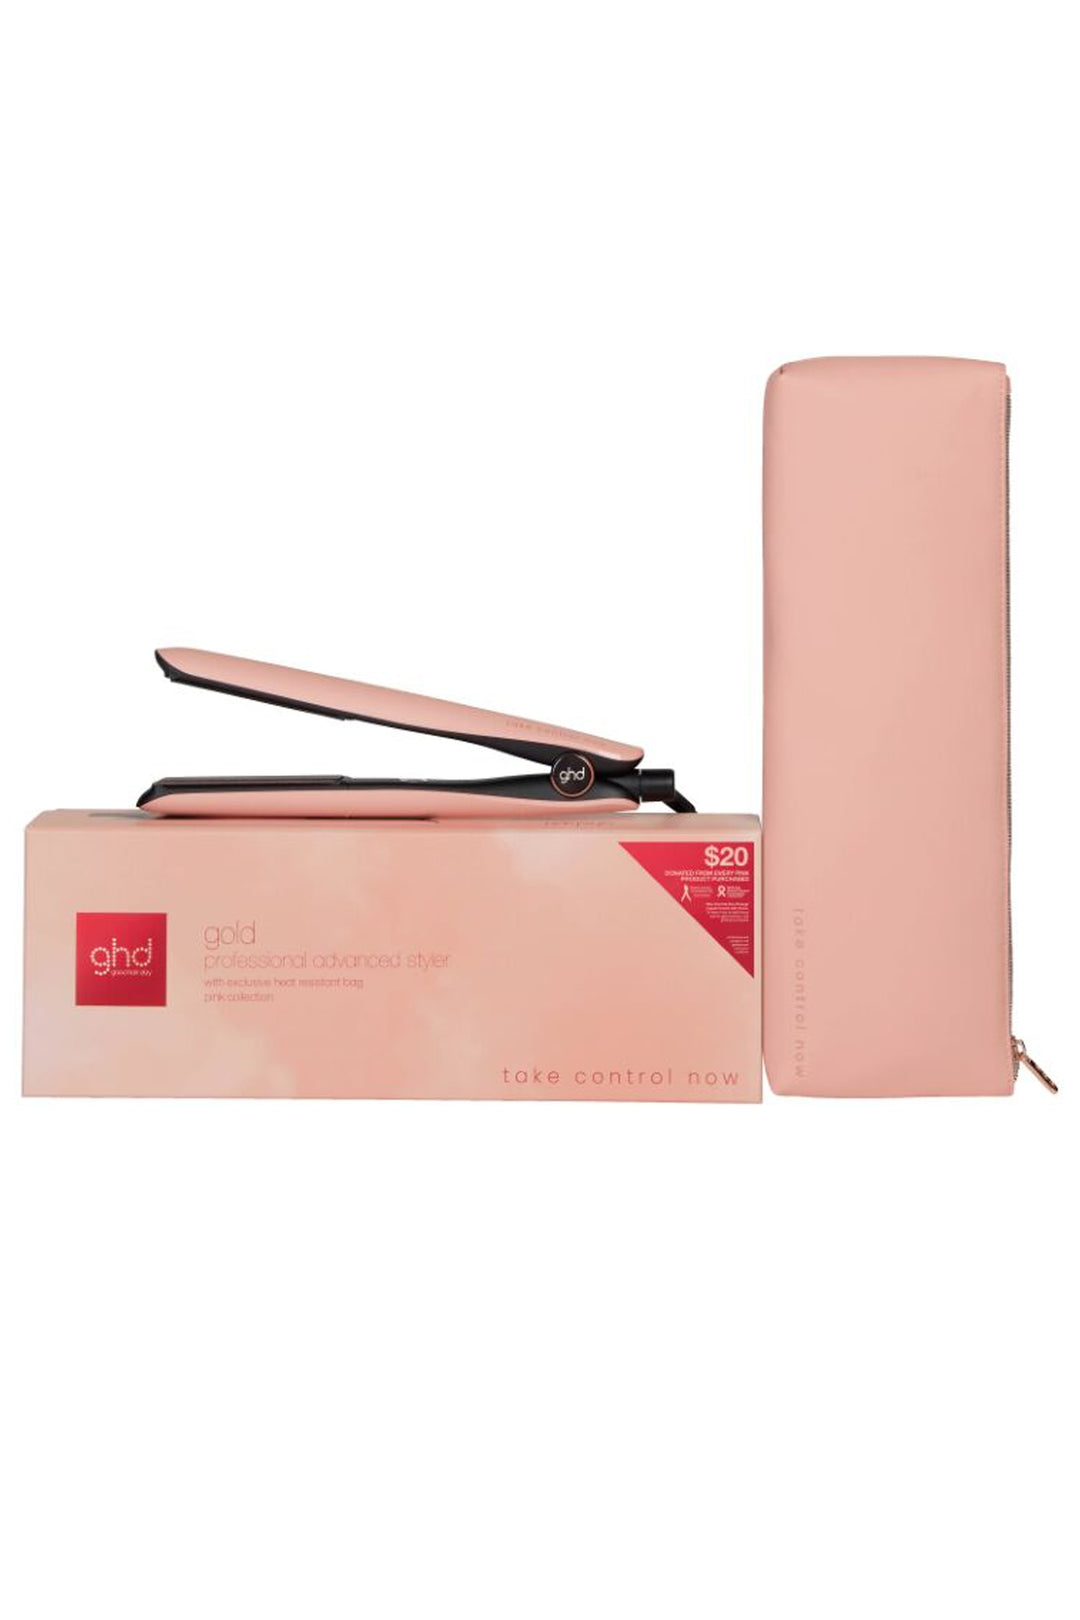 Ghd Max Sunsthetic Collection